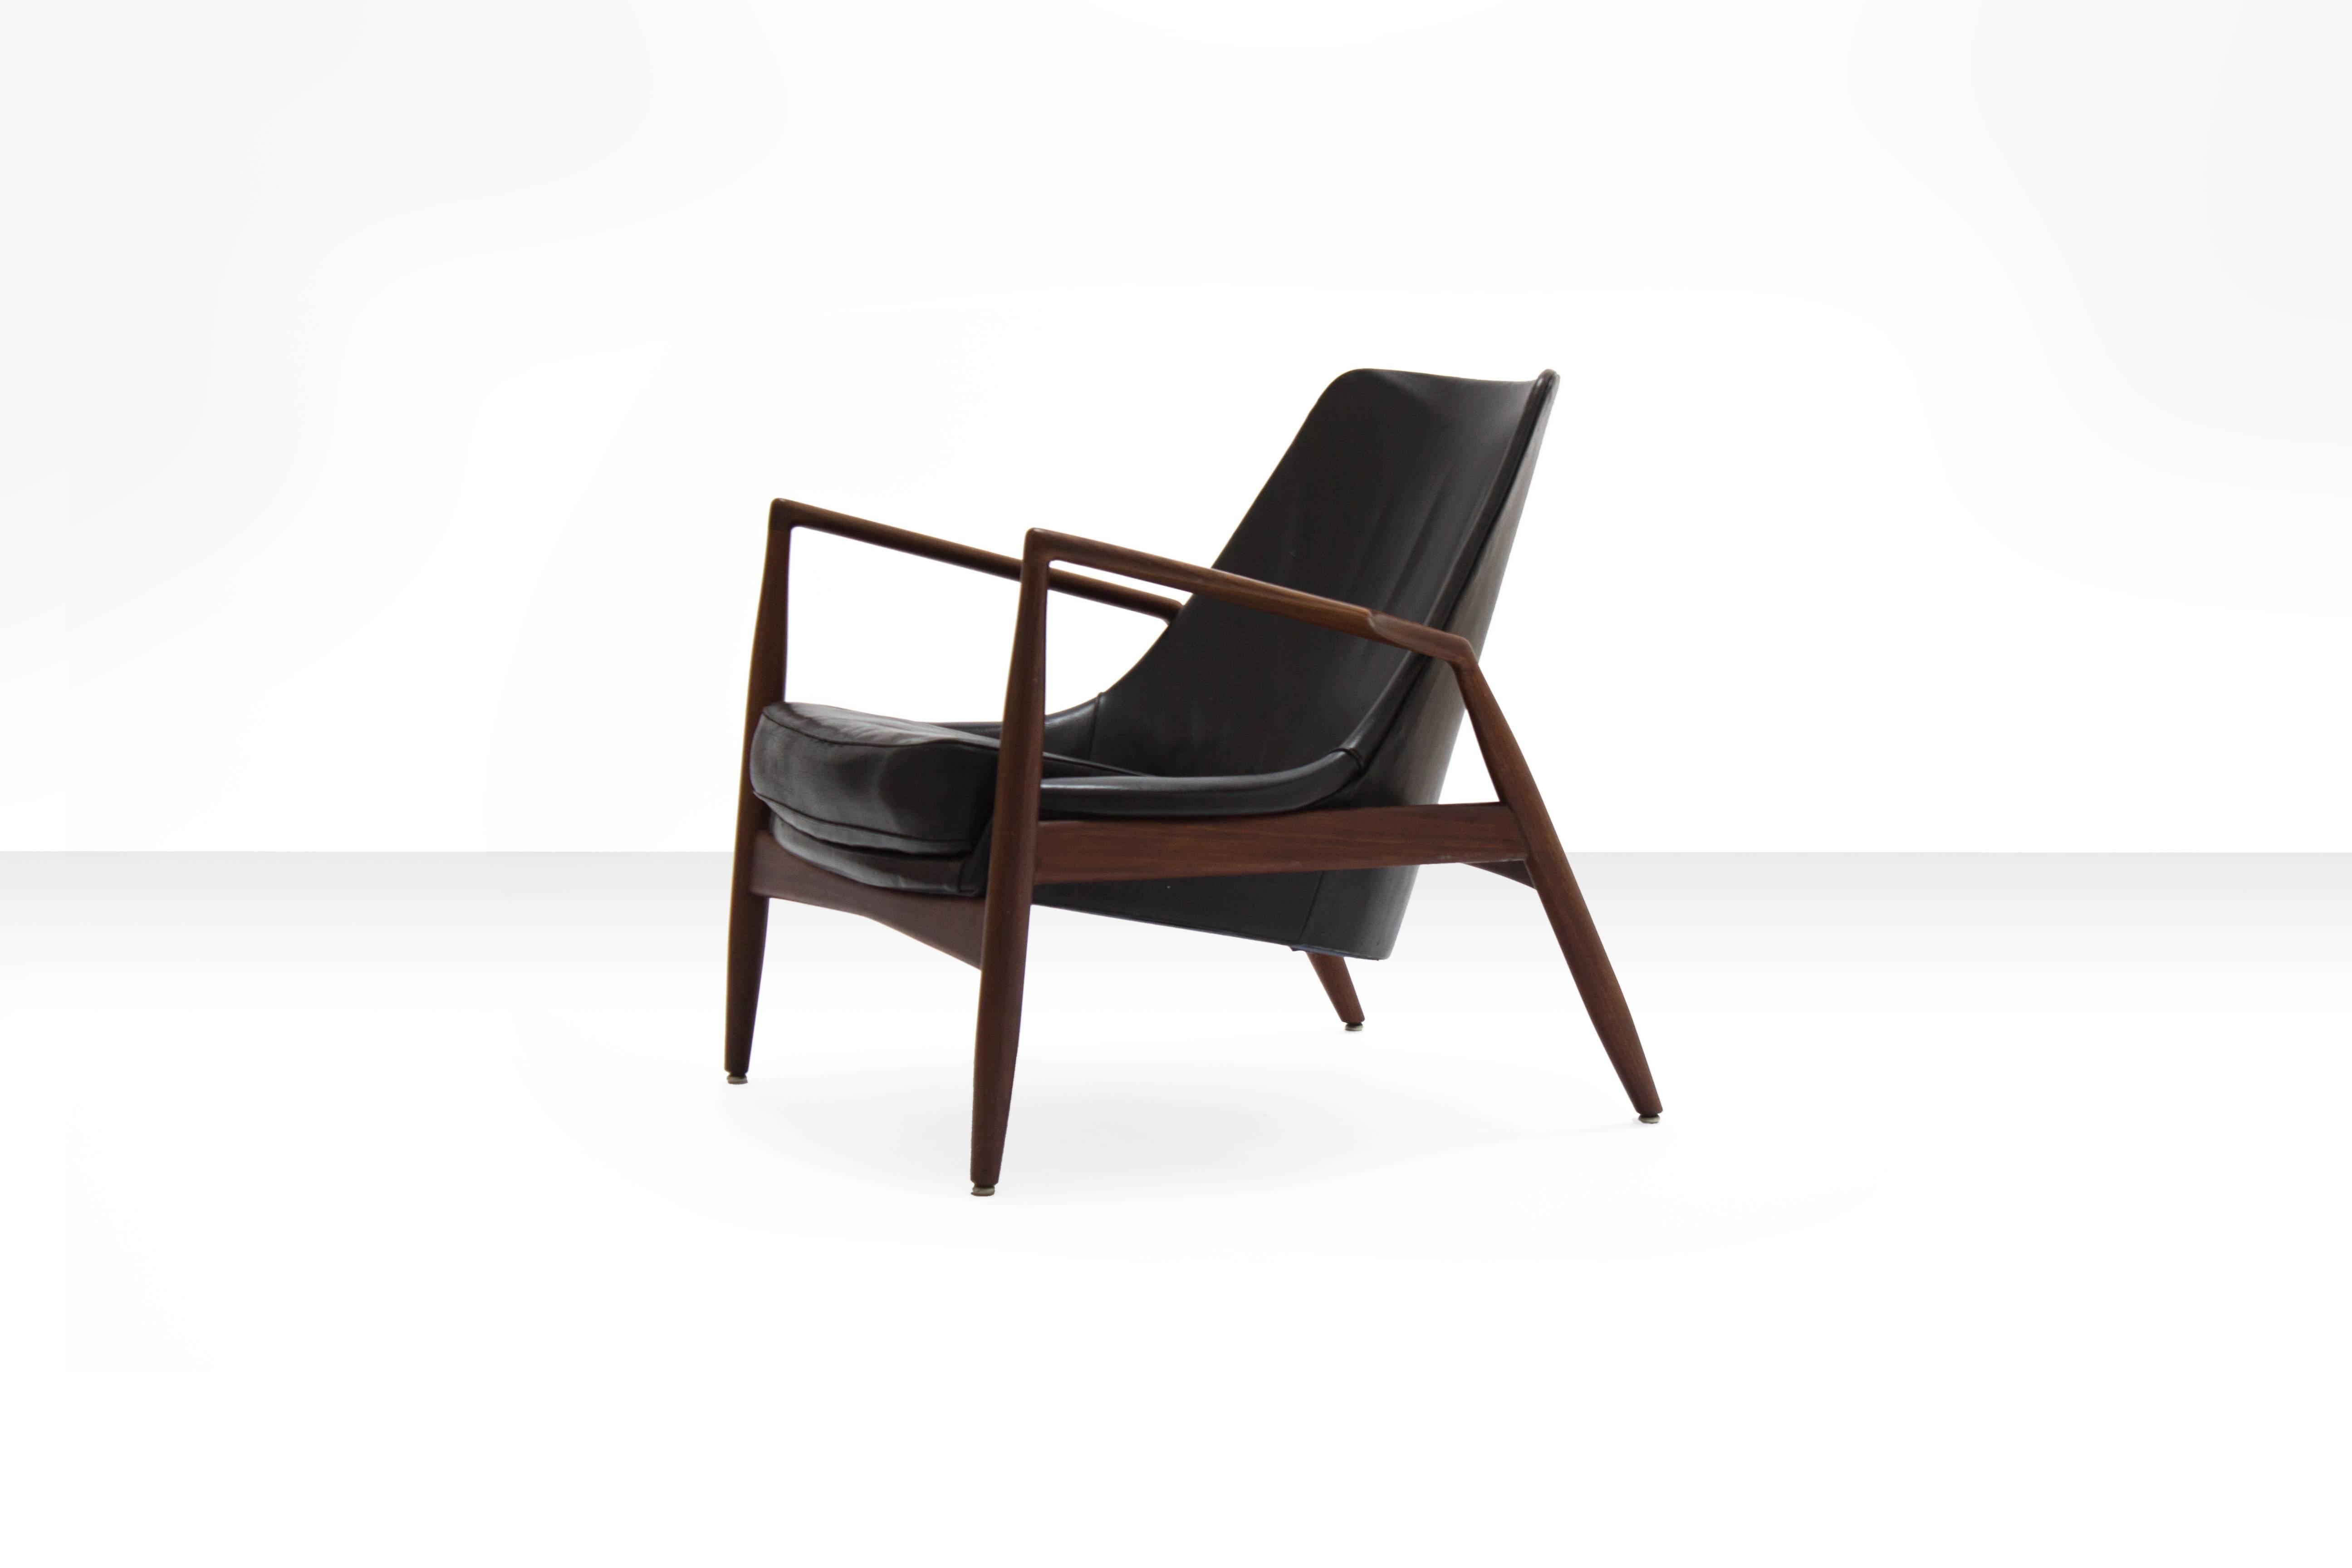 Black leather version of the classic Sälen (seal) lounge chair by Ib Kofod-Larsen in teak with original fabric for OPE, 1956

This iconic lounge chair is a true modern classic and together with the Elizabeth chair belongs to the best works designed